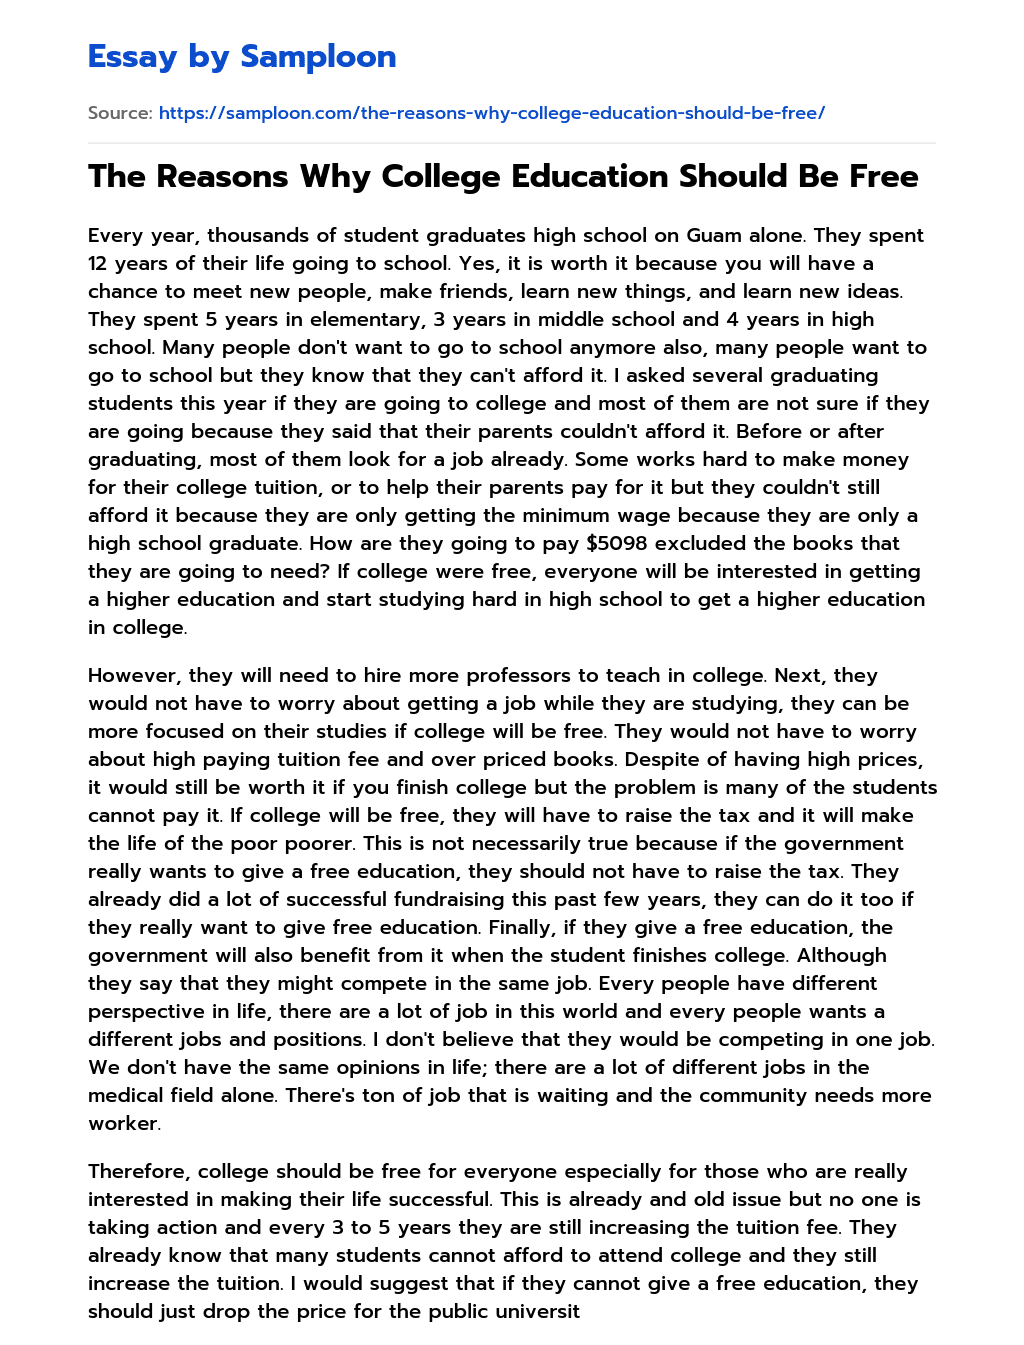 The Reasons Why College Education Should Be Free essay